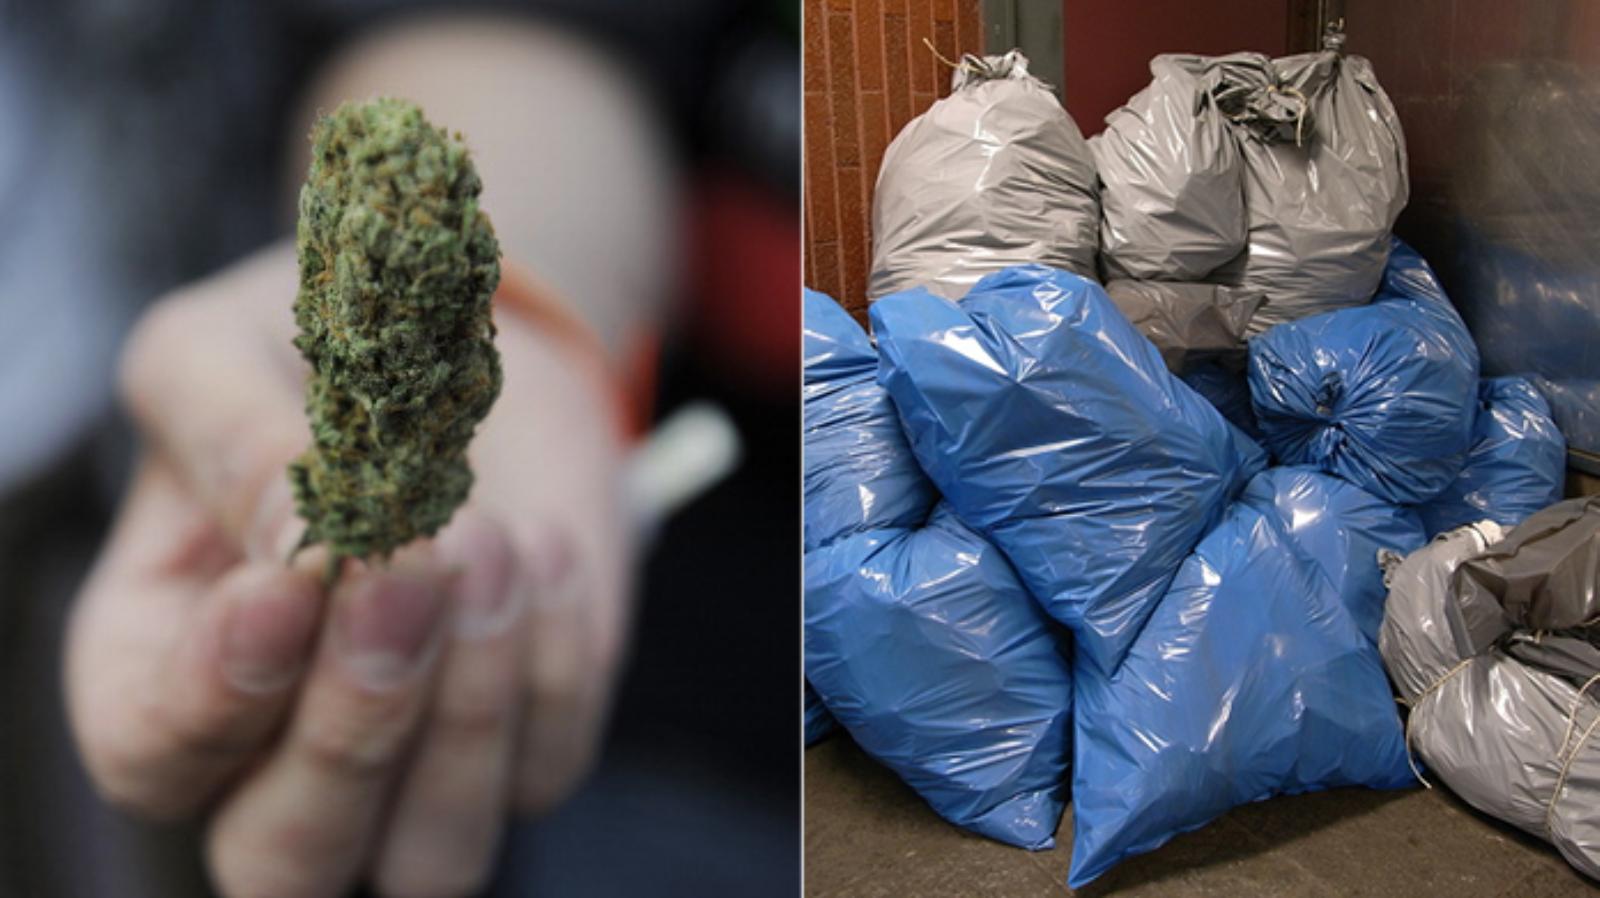 People Are Now Getting Free Weed to Pick Up Trash